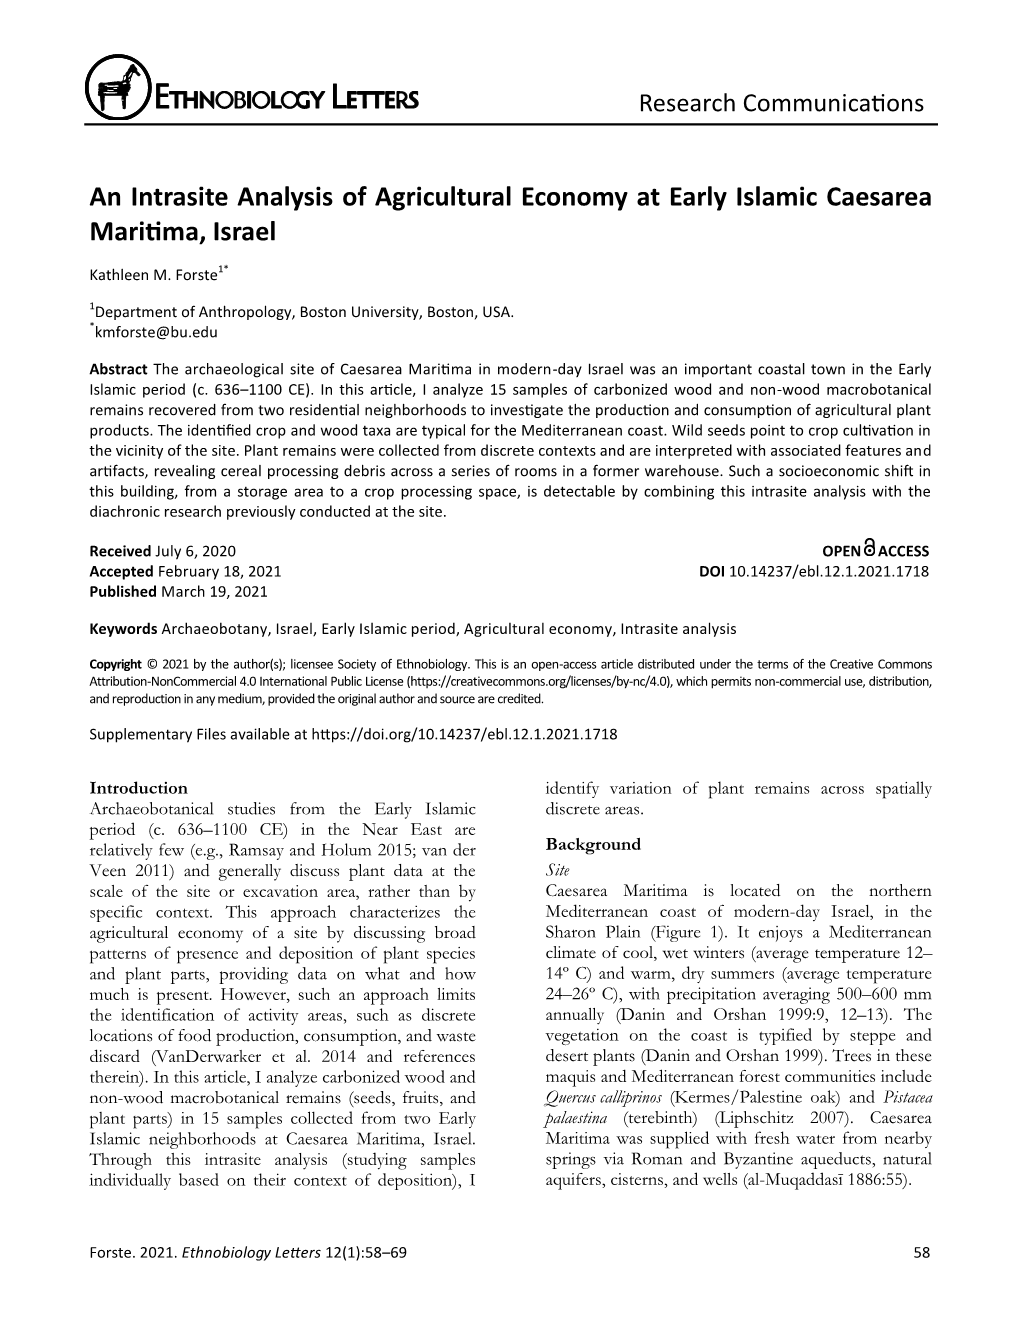 An Intrasite Analysis of Agricultural Economy at Early Islamic Caesarea Maritima, Israel